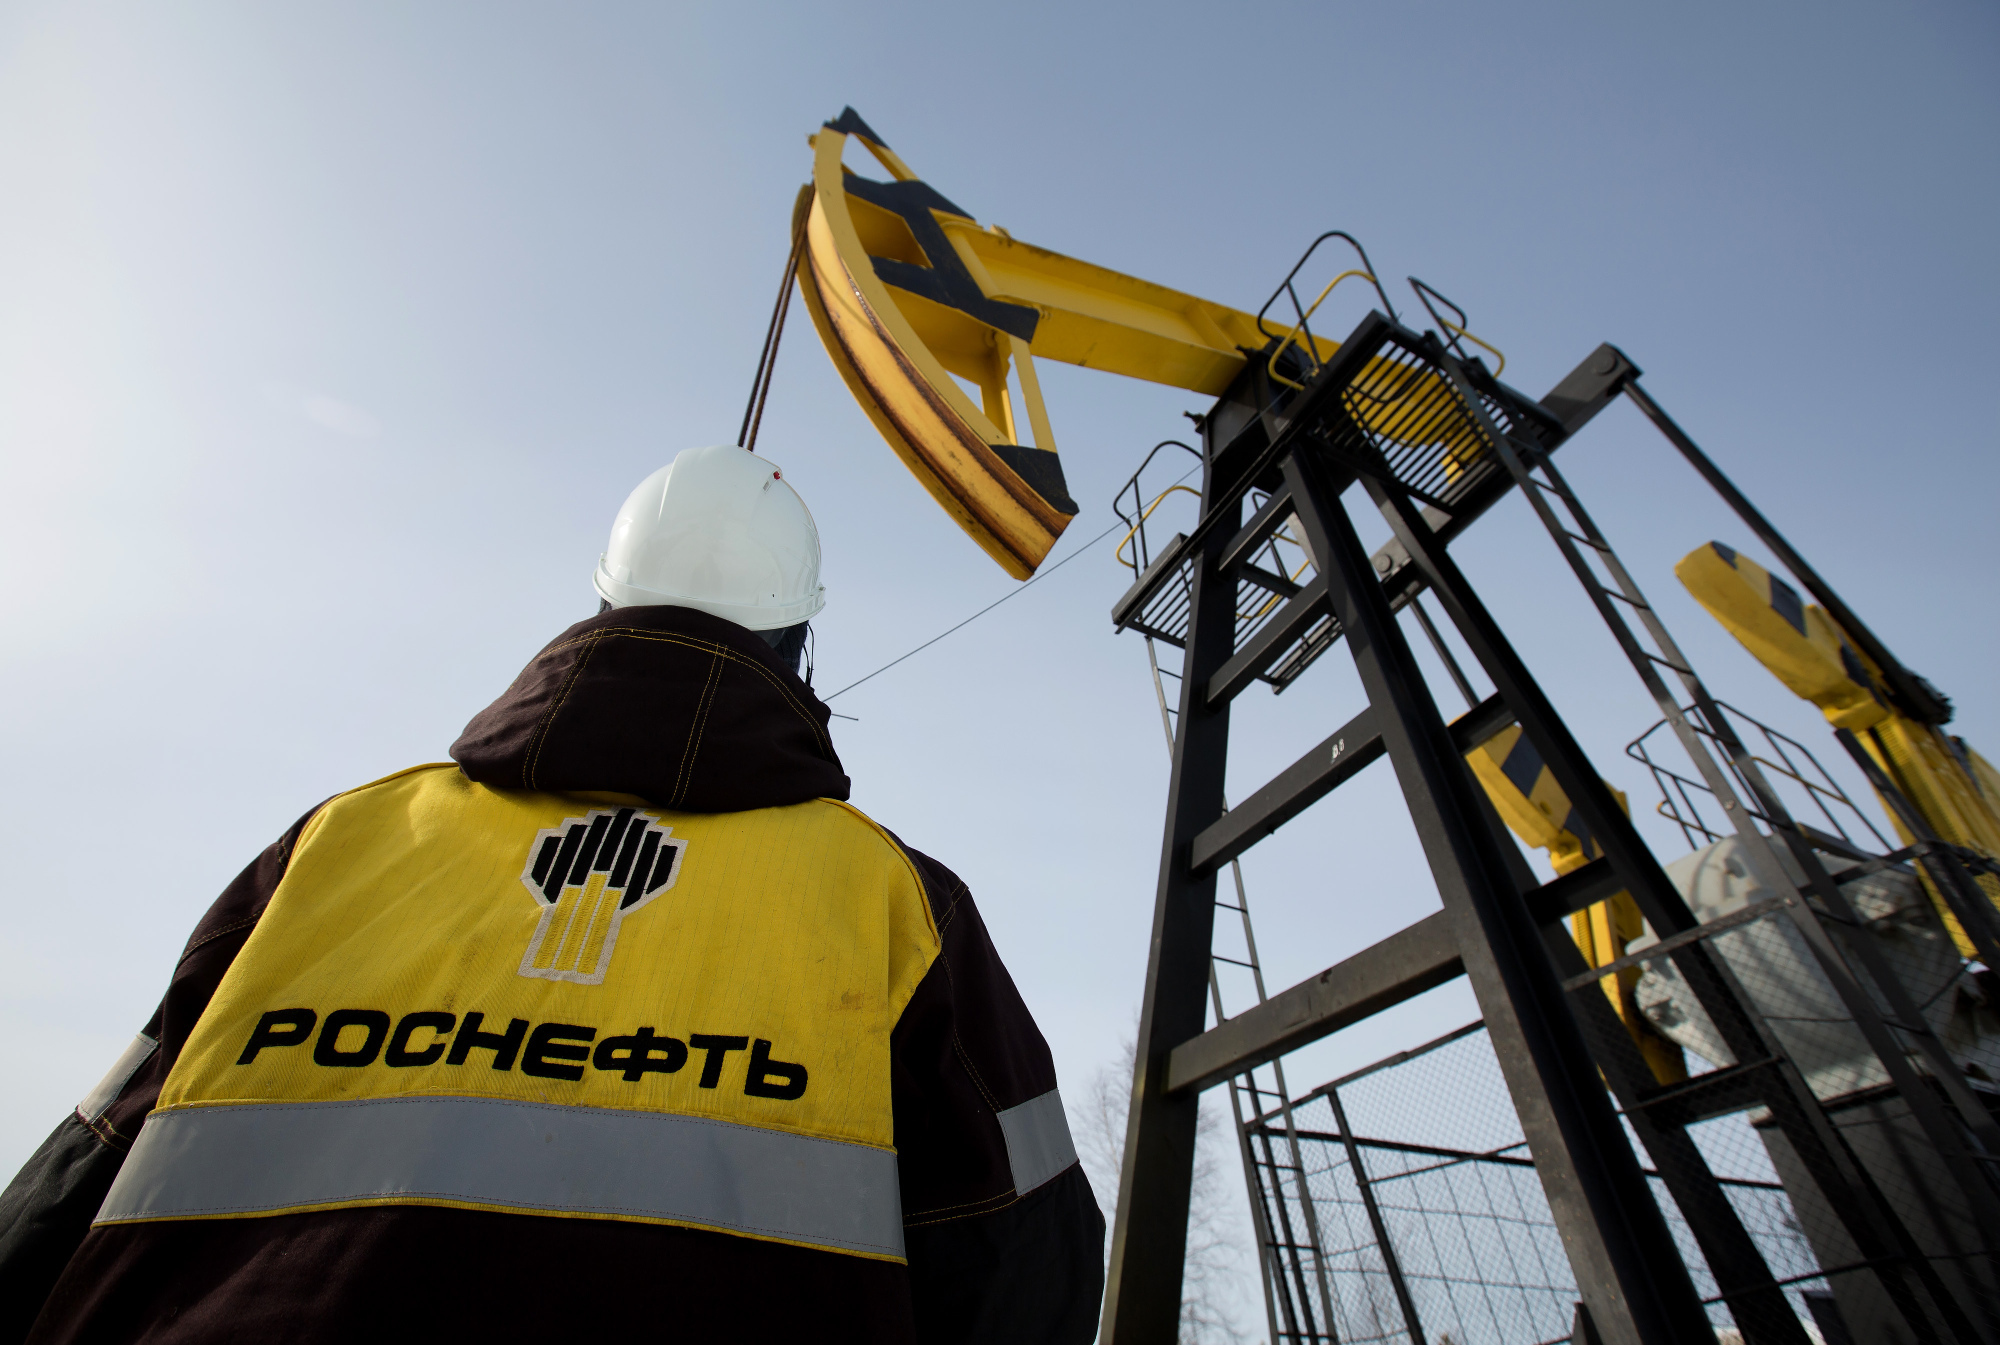 Workers inspect an oil pumping jack, also known as a 'nodding donkey' at a pumping site, operated by Rosneft PJSC, in the Samotlor oilfield near Nizhnevartovsk, Russia, on Wednesday, March 22, 2017. Russia's largest oil field, so far past its prime that it now pumps almost 20 times more water than crude, could be on the verge of gushing profits again for Rosneft PJSC. Photographer: Andrey Rudakov/Bloomberg